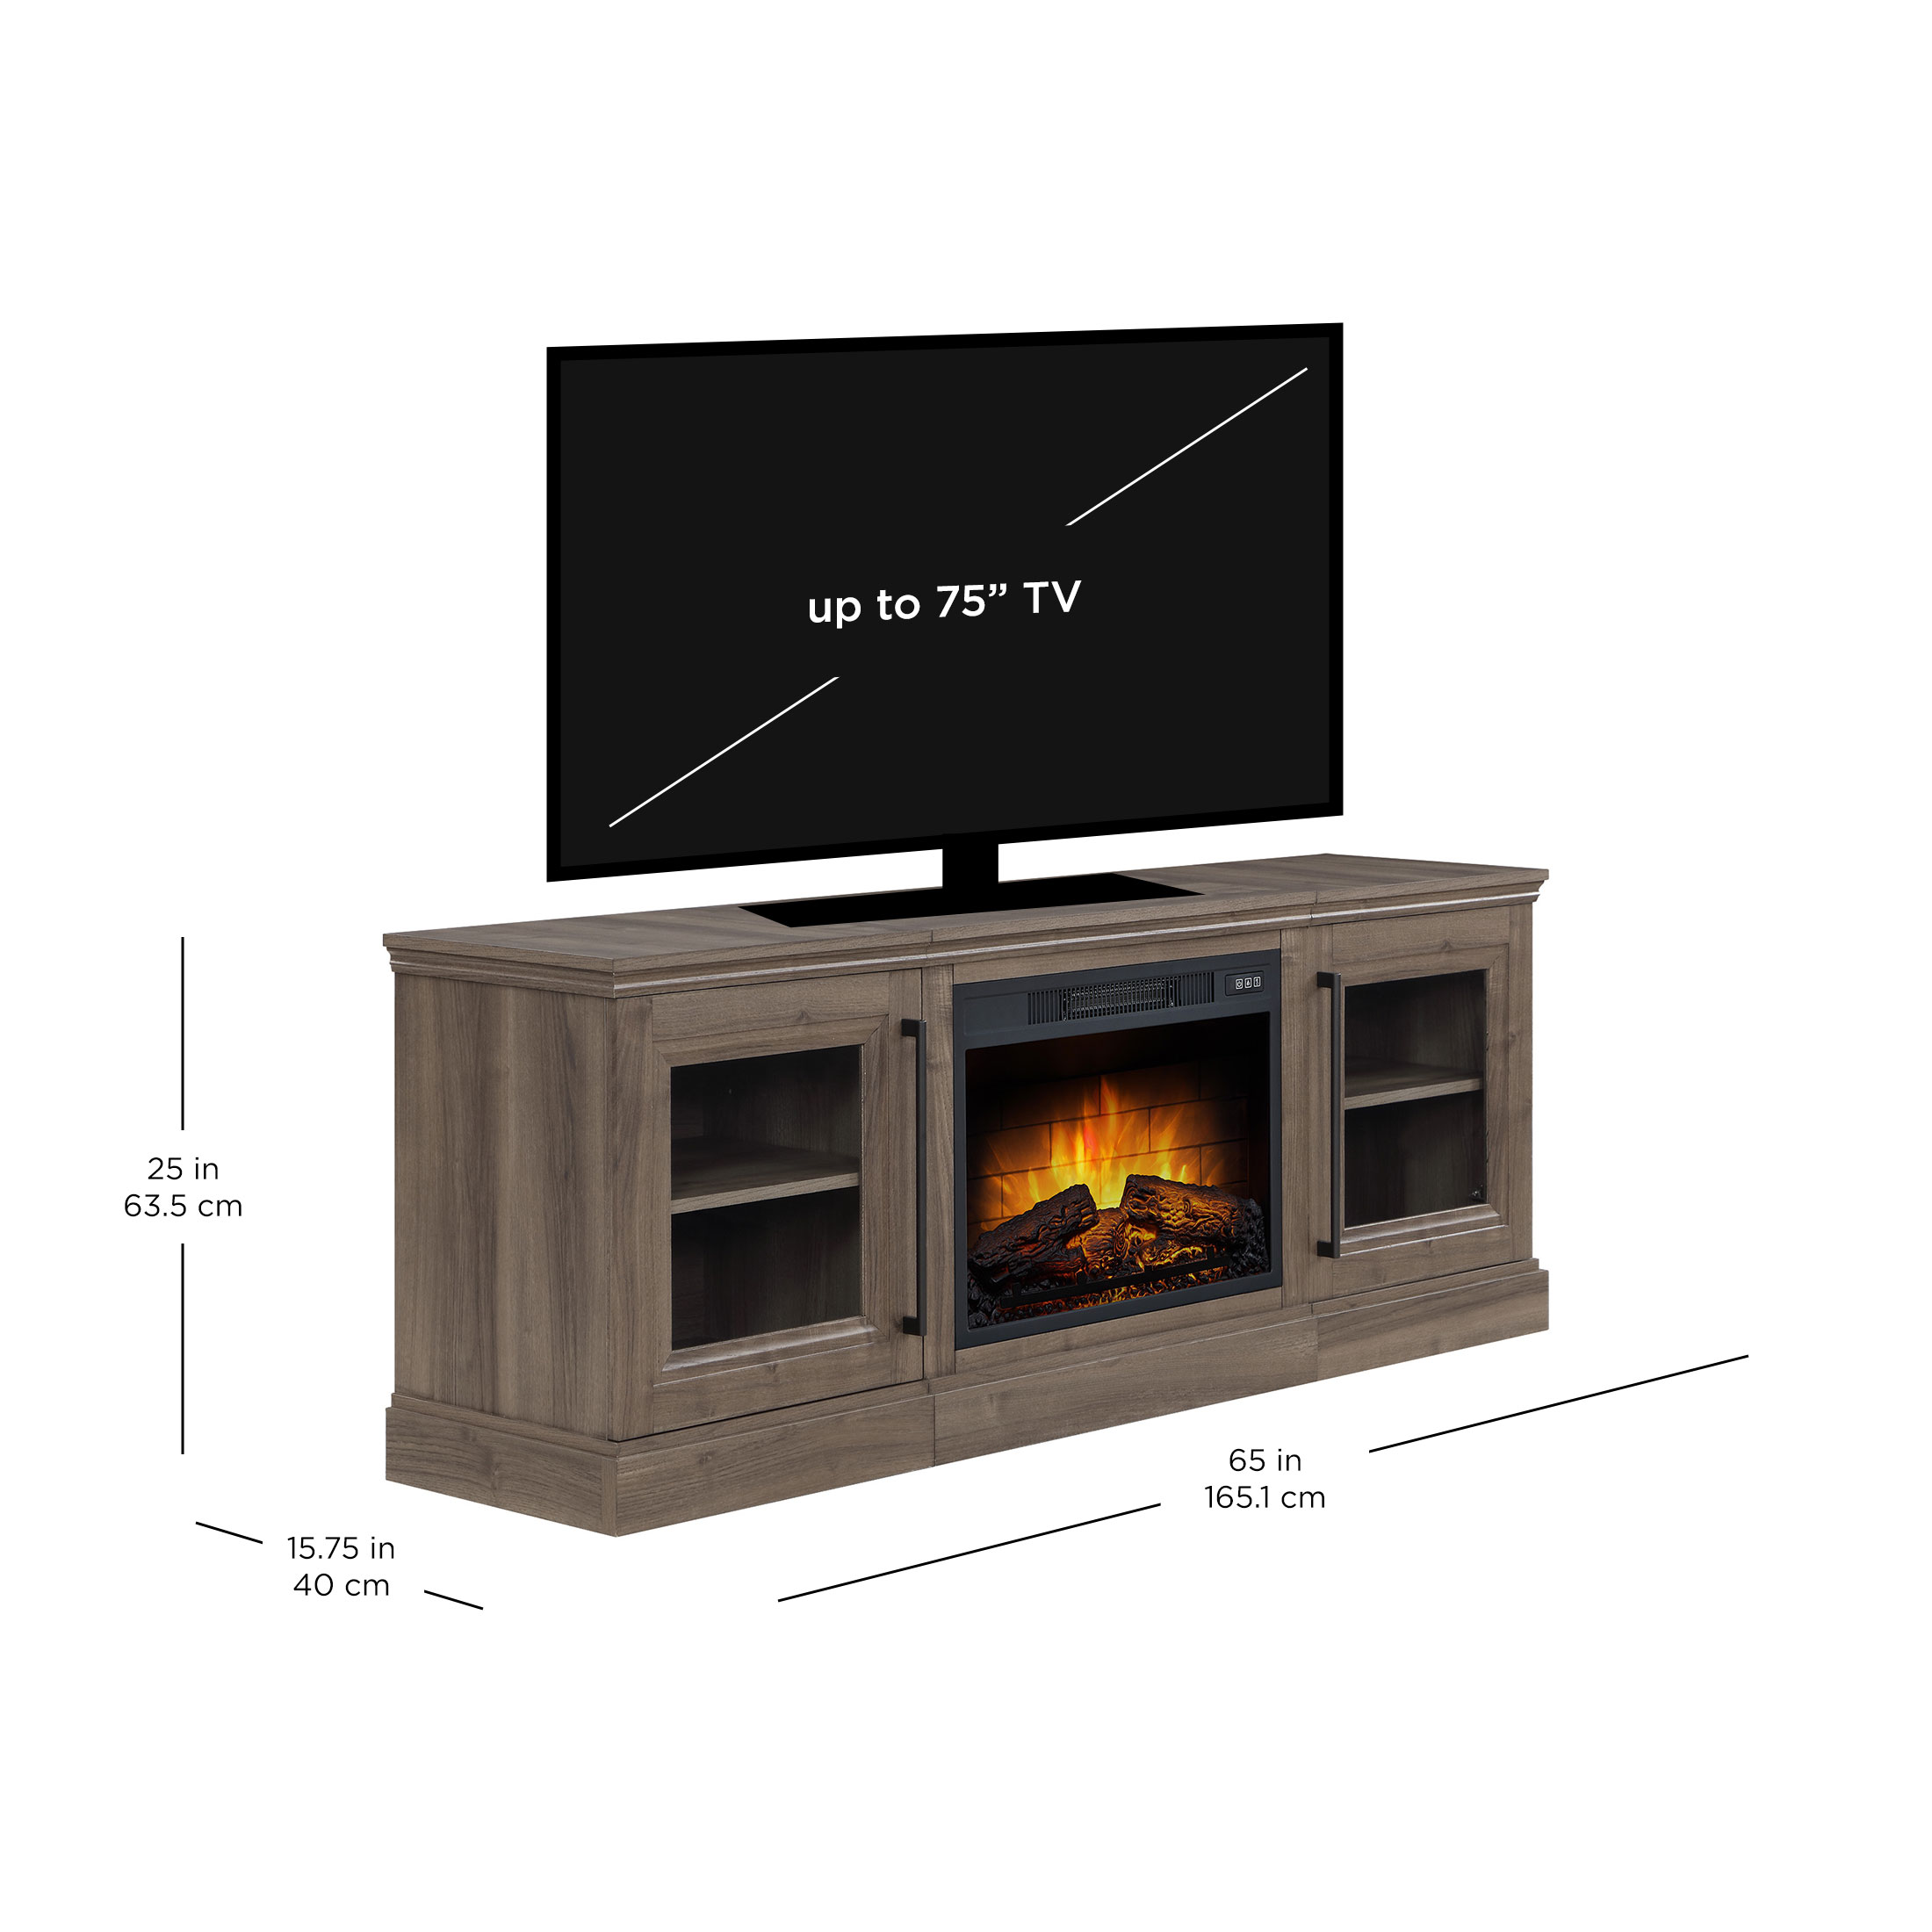 Whalen Furniture Quantum Flame Media Fireplace TV Stand for TV’s up to 75”, Walnut Brown Finish - image 3 of 12